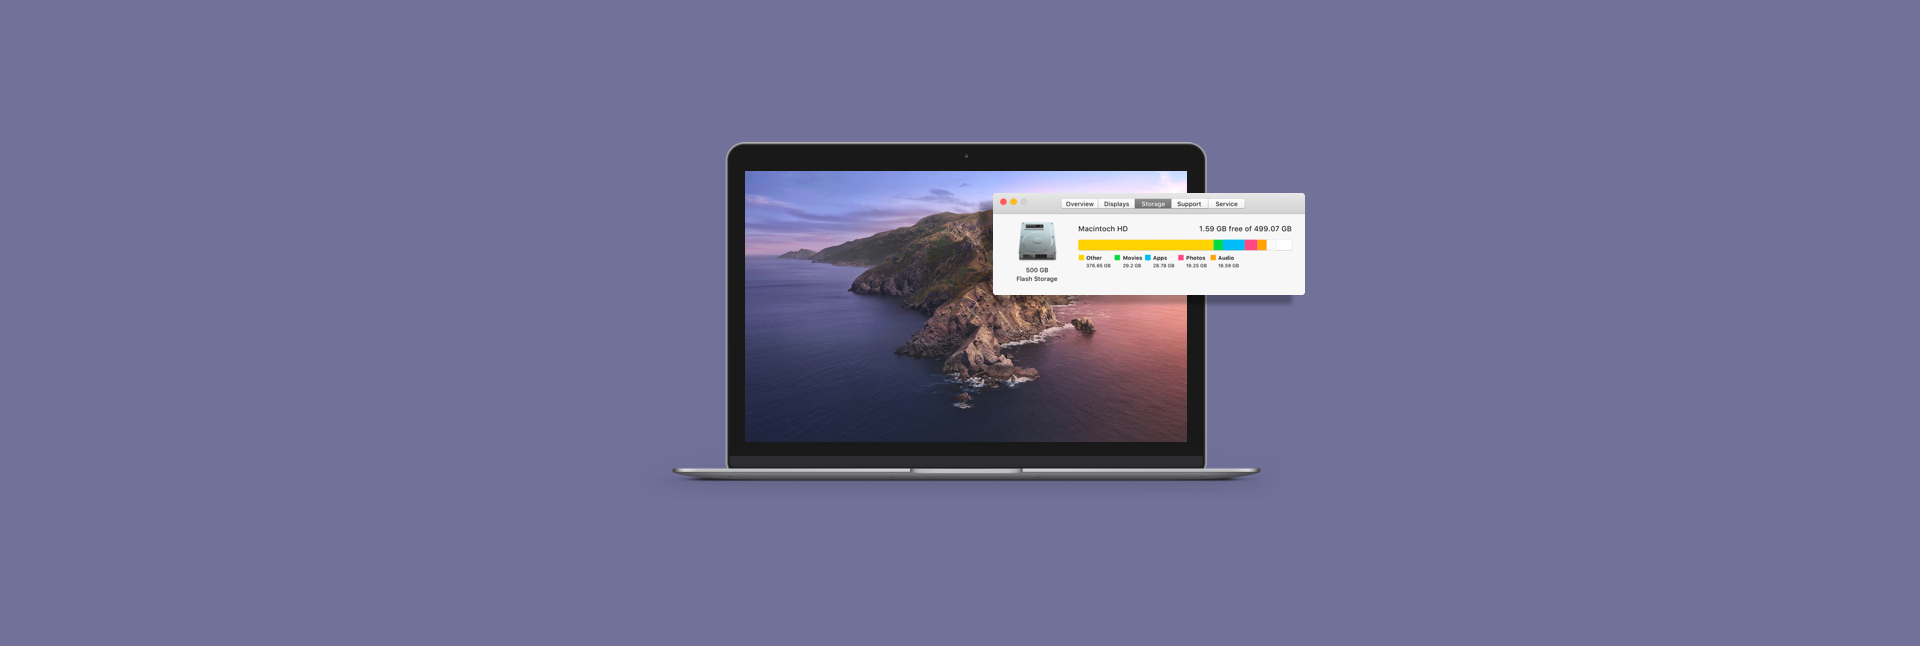 best way to free up disk space on mac